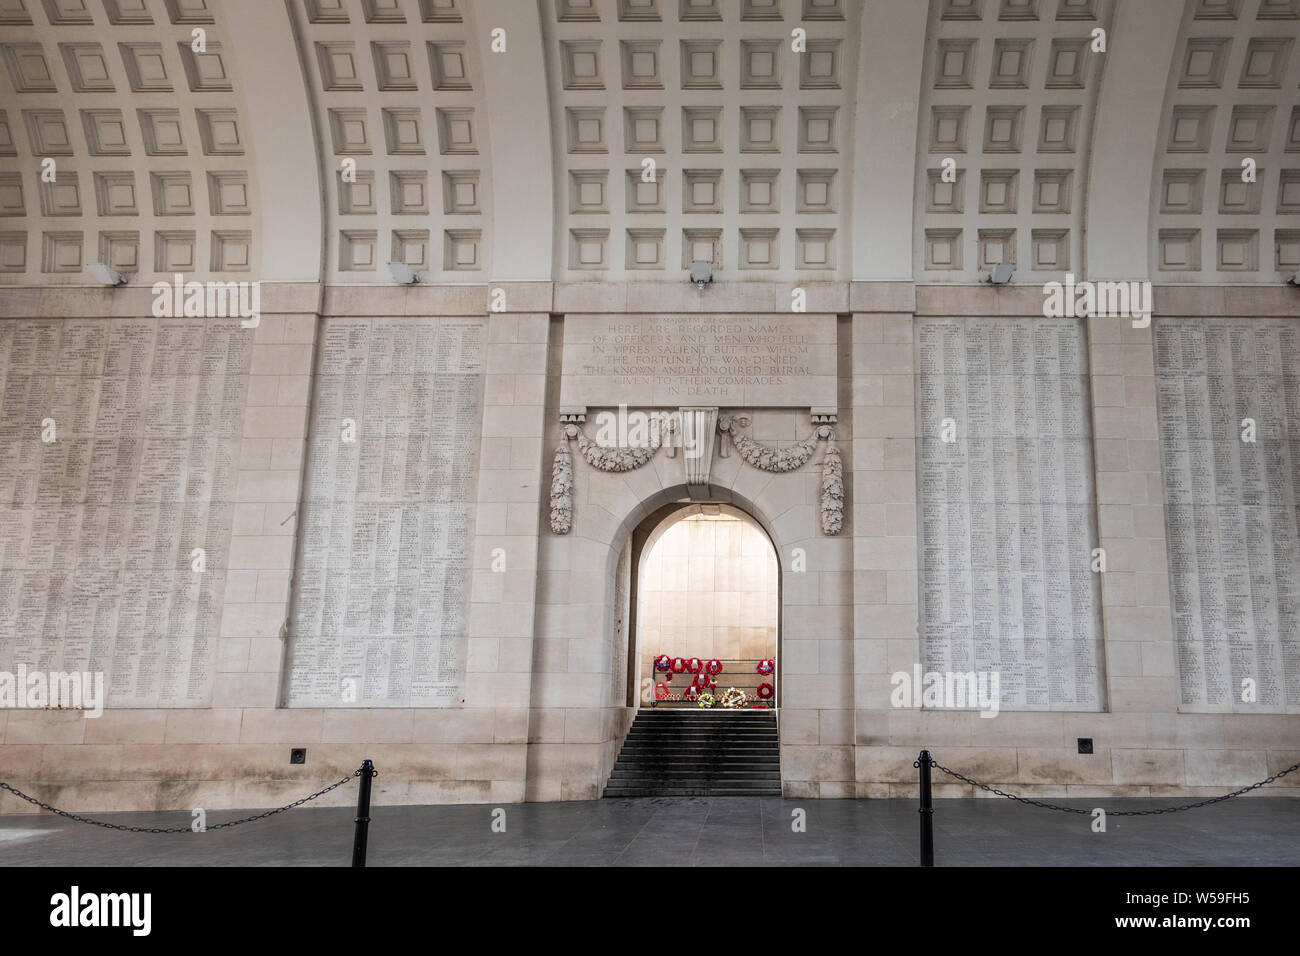 Behind the names on the Menin Gate